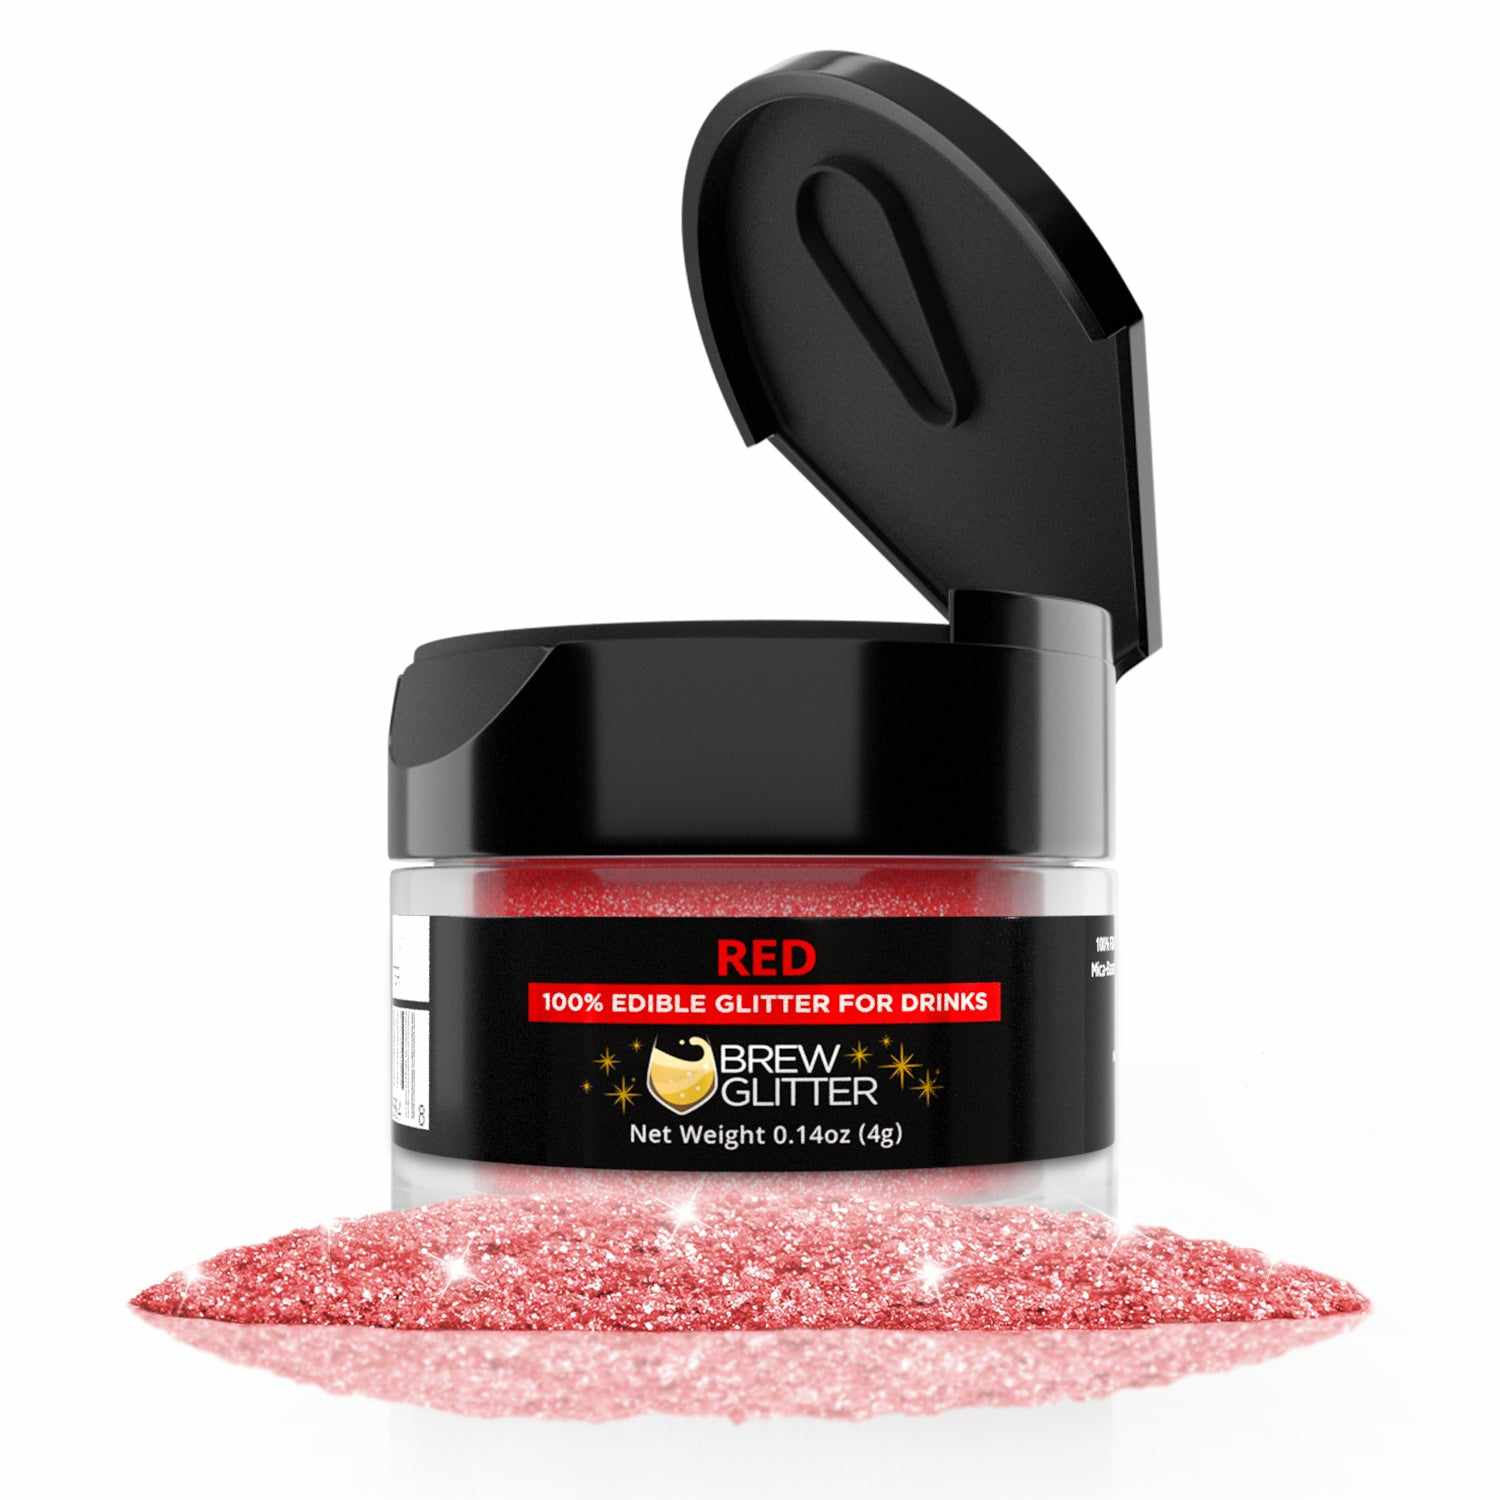 Red Cocktail Glitter | Edible Glitter for Cocktails Drinks!